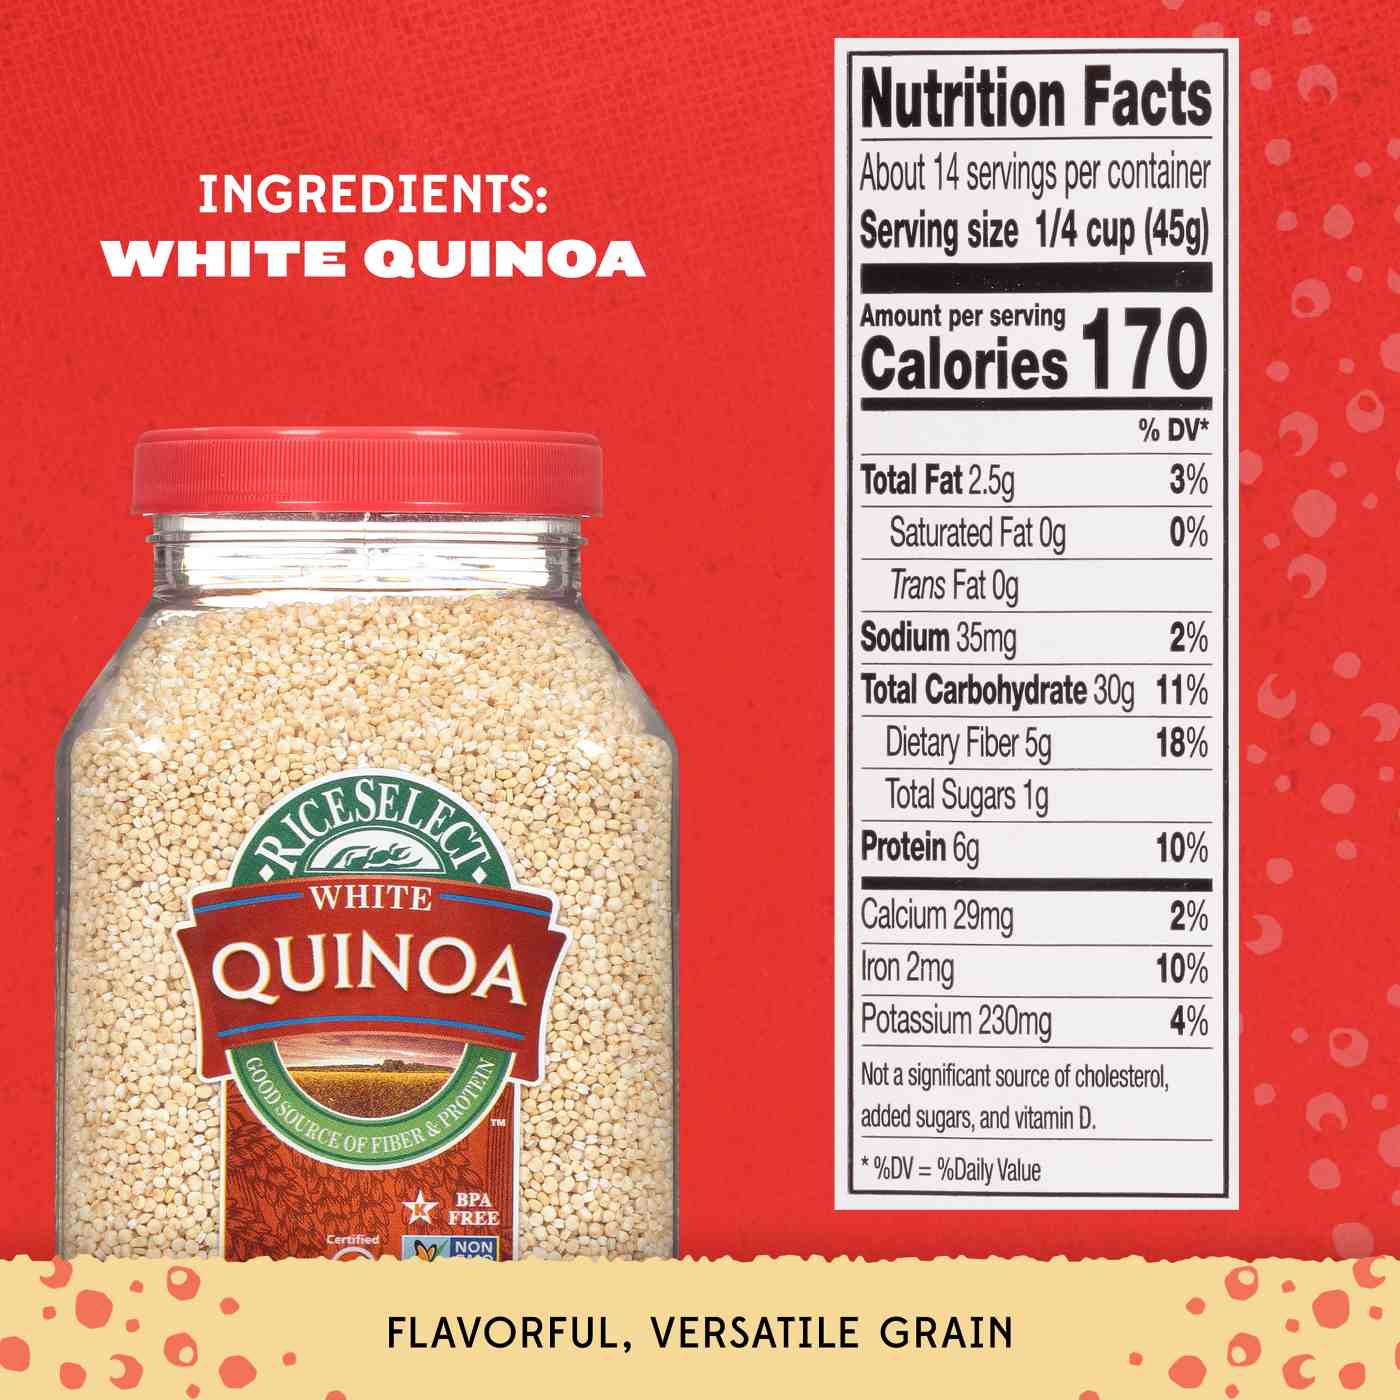 RiceSelect White Quinoa; image 2 of 6